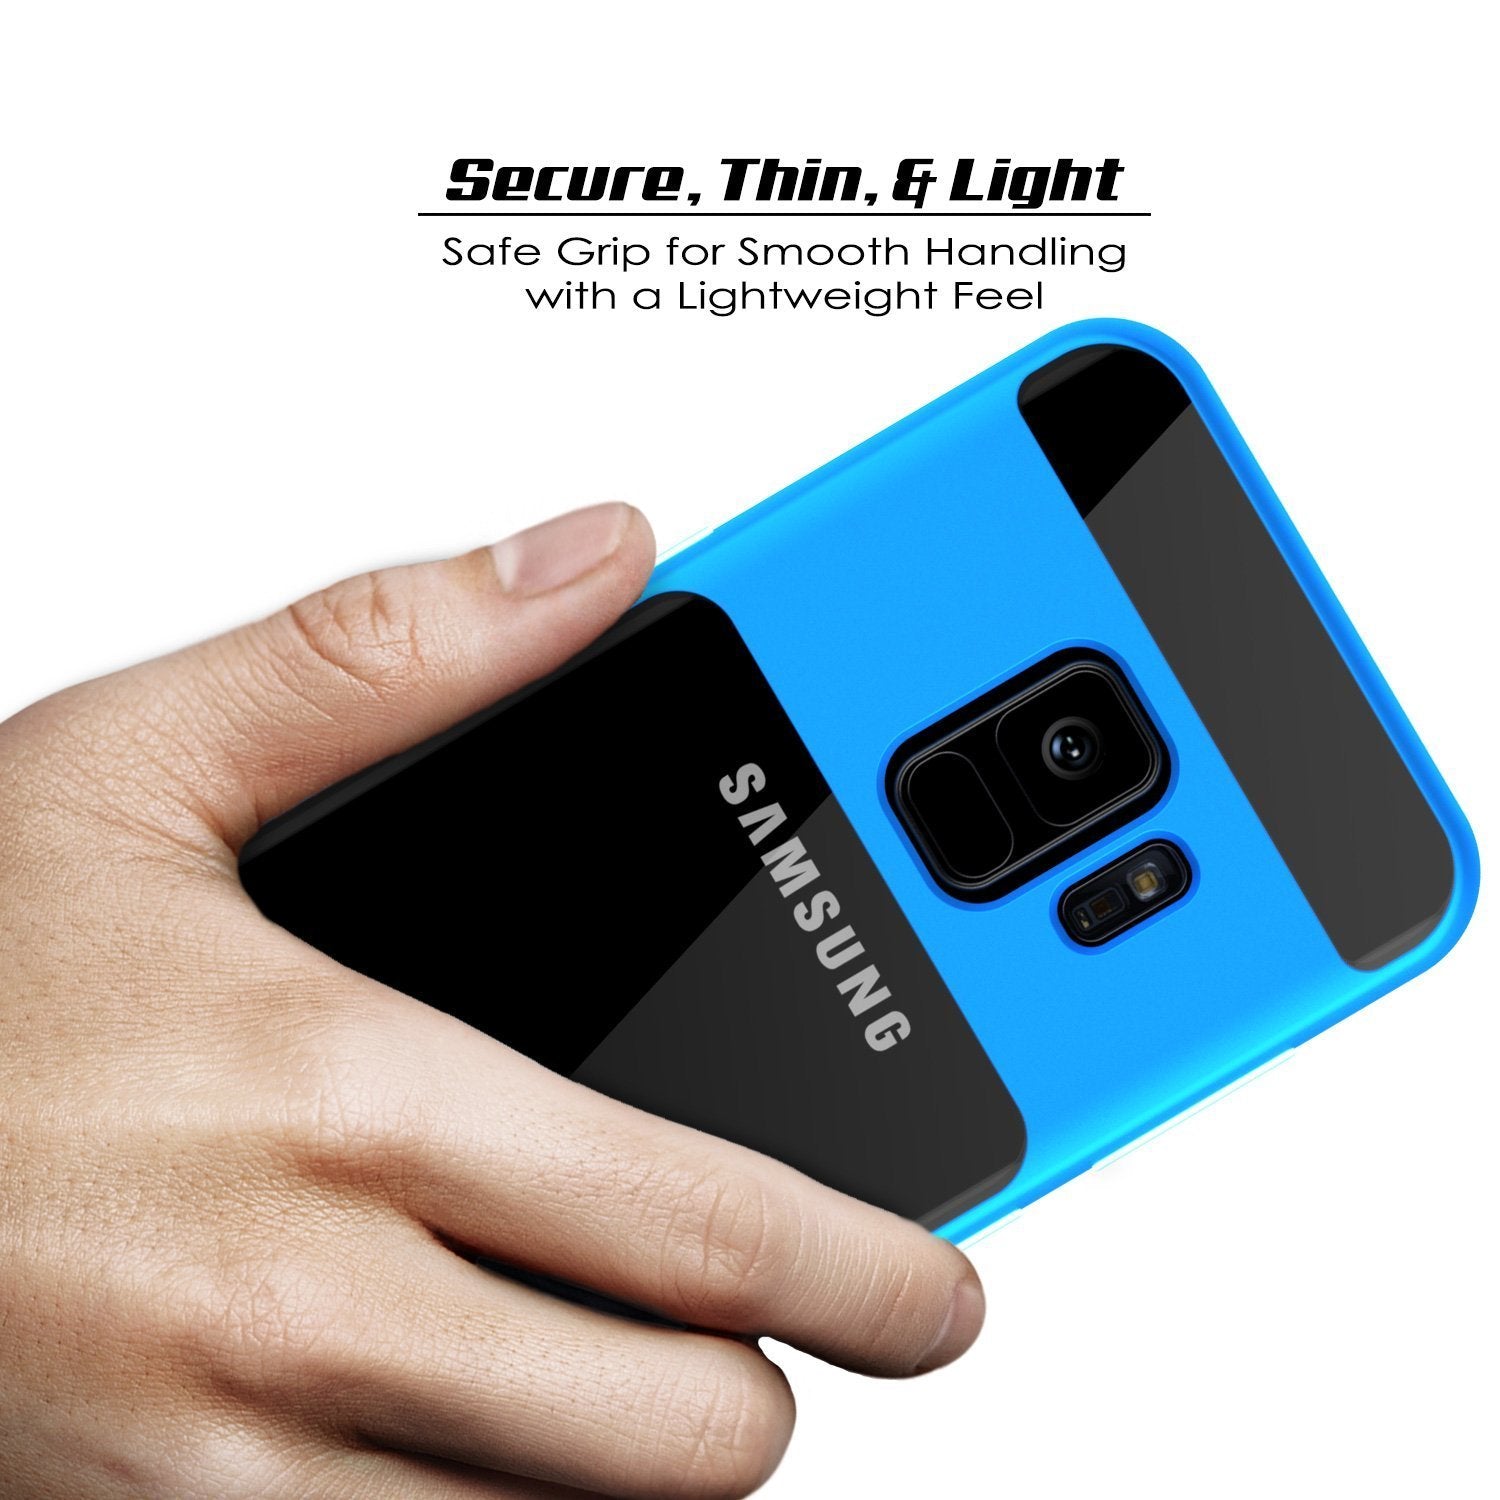 Galaxy S9 Punkcase, LUCID 3.0 Series Cover w/Kickstand, [Blue]